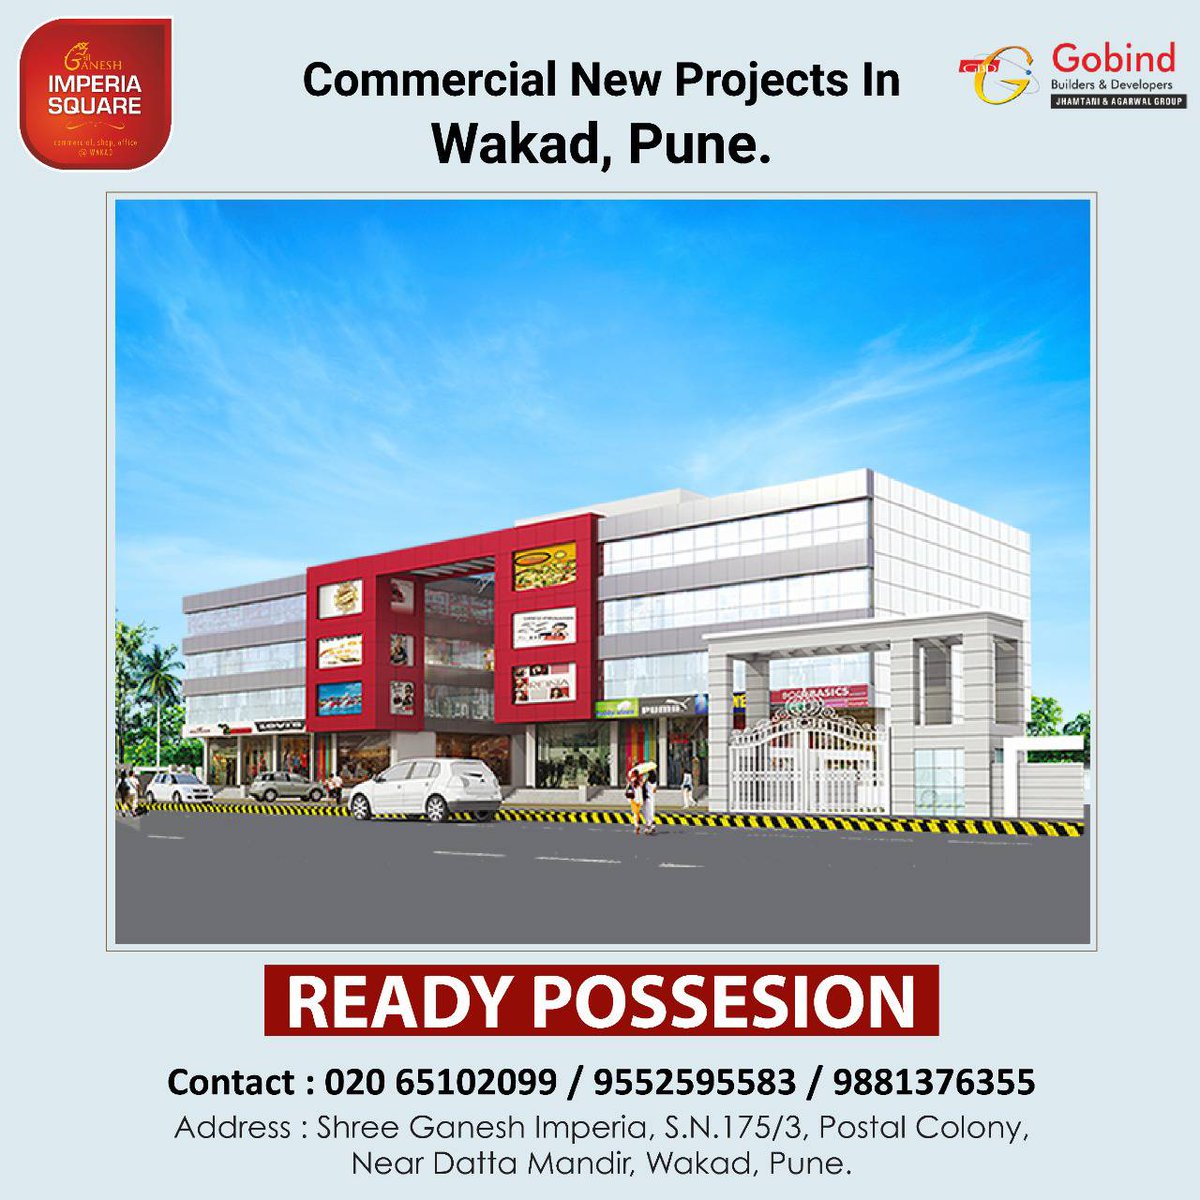 A best investment is to invest in Commercial Estate.
▶️Ganesh Imperia
👍New Commercial Ready Possession 
Call Us Now: 9881376355/ 9552595583/ 020 - 65102099
#commercialproject #realestate #business #gobinbuilder #puneproperties #Realtor #CommercialProperty #Wakad #ganeshimperia